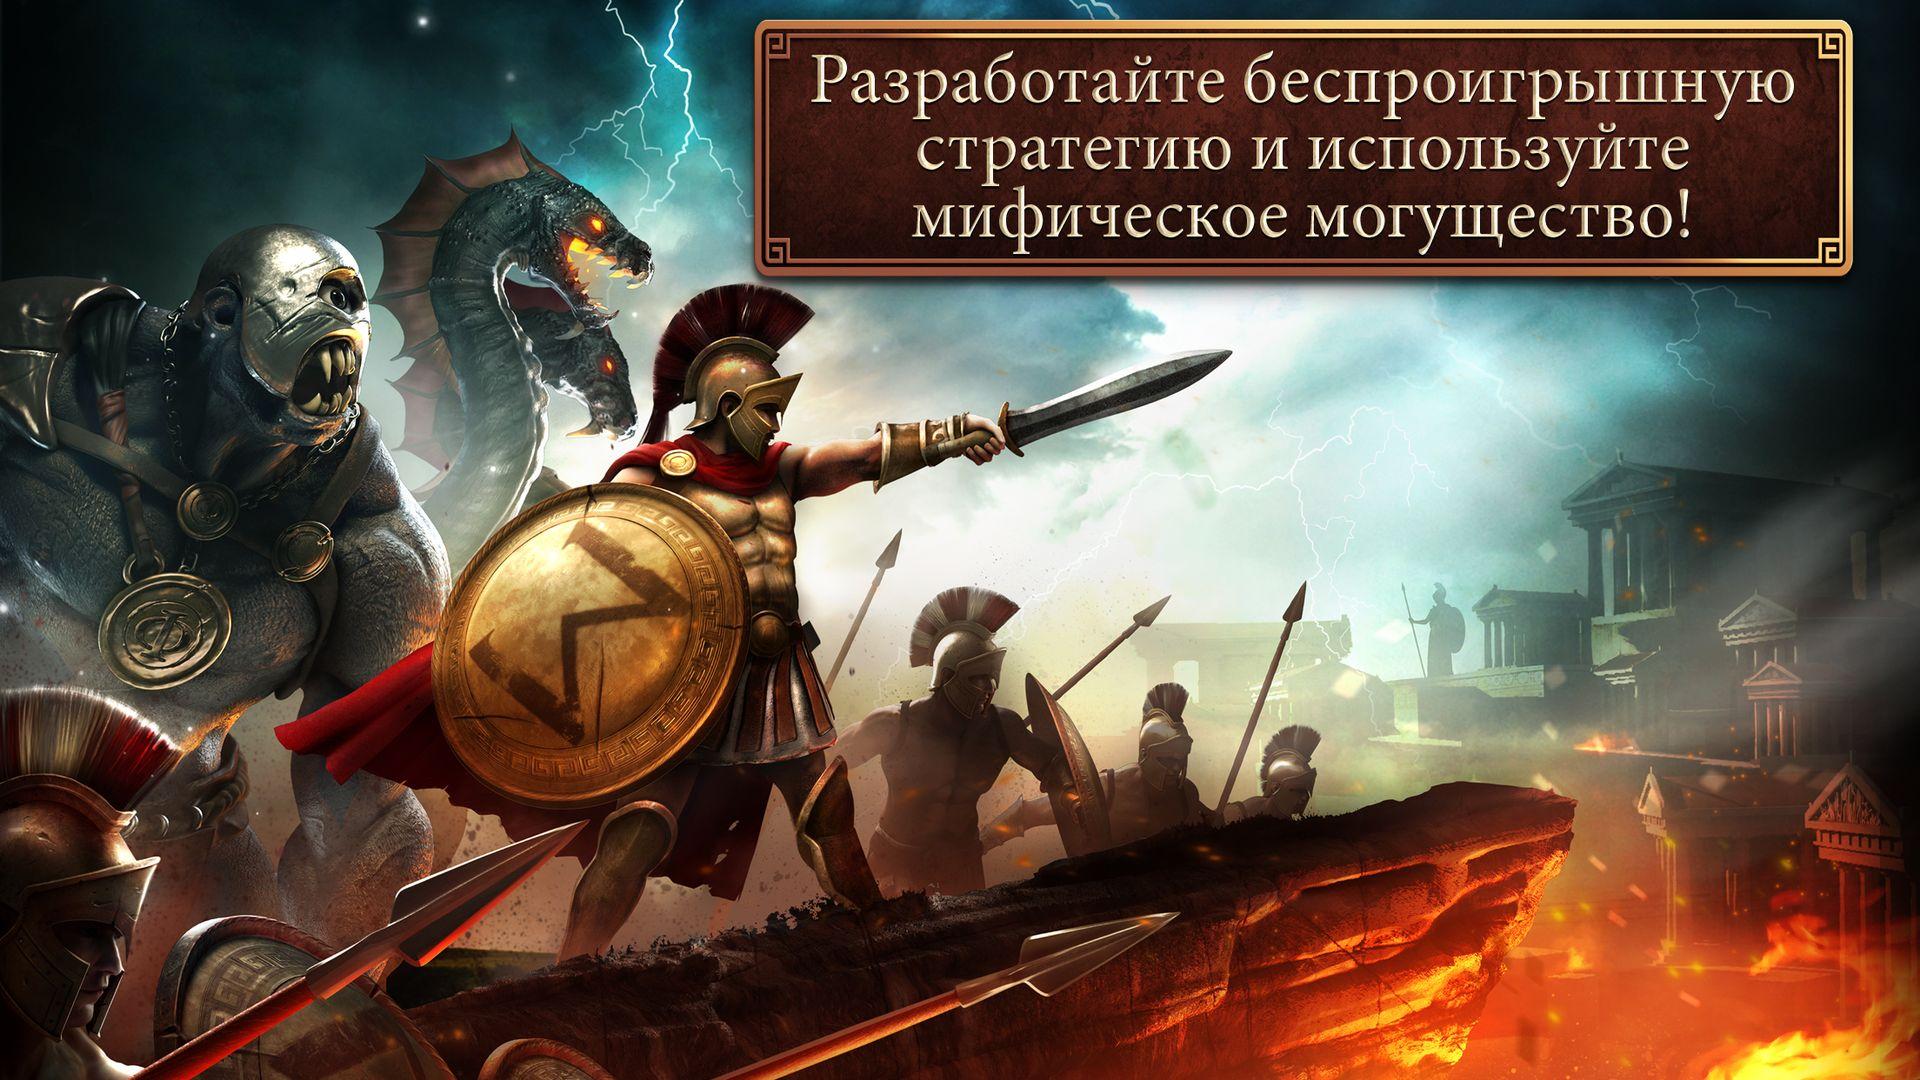 Android application Age of Sparta screenshort